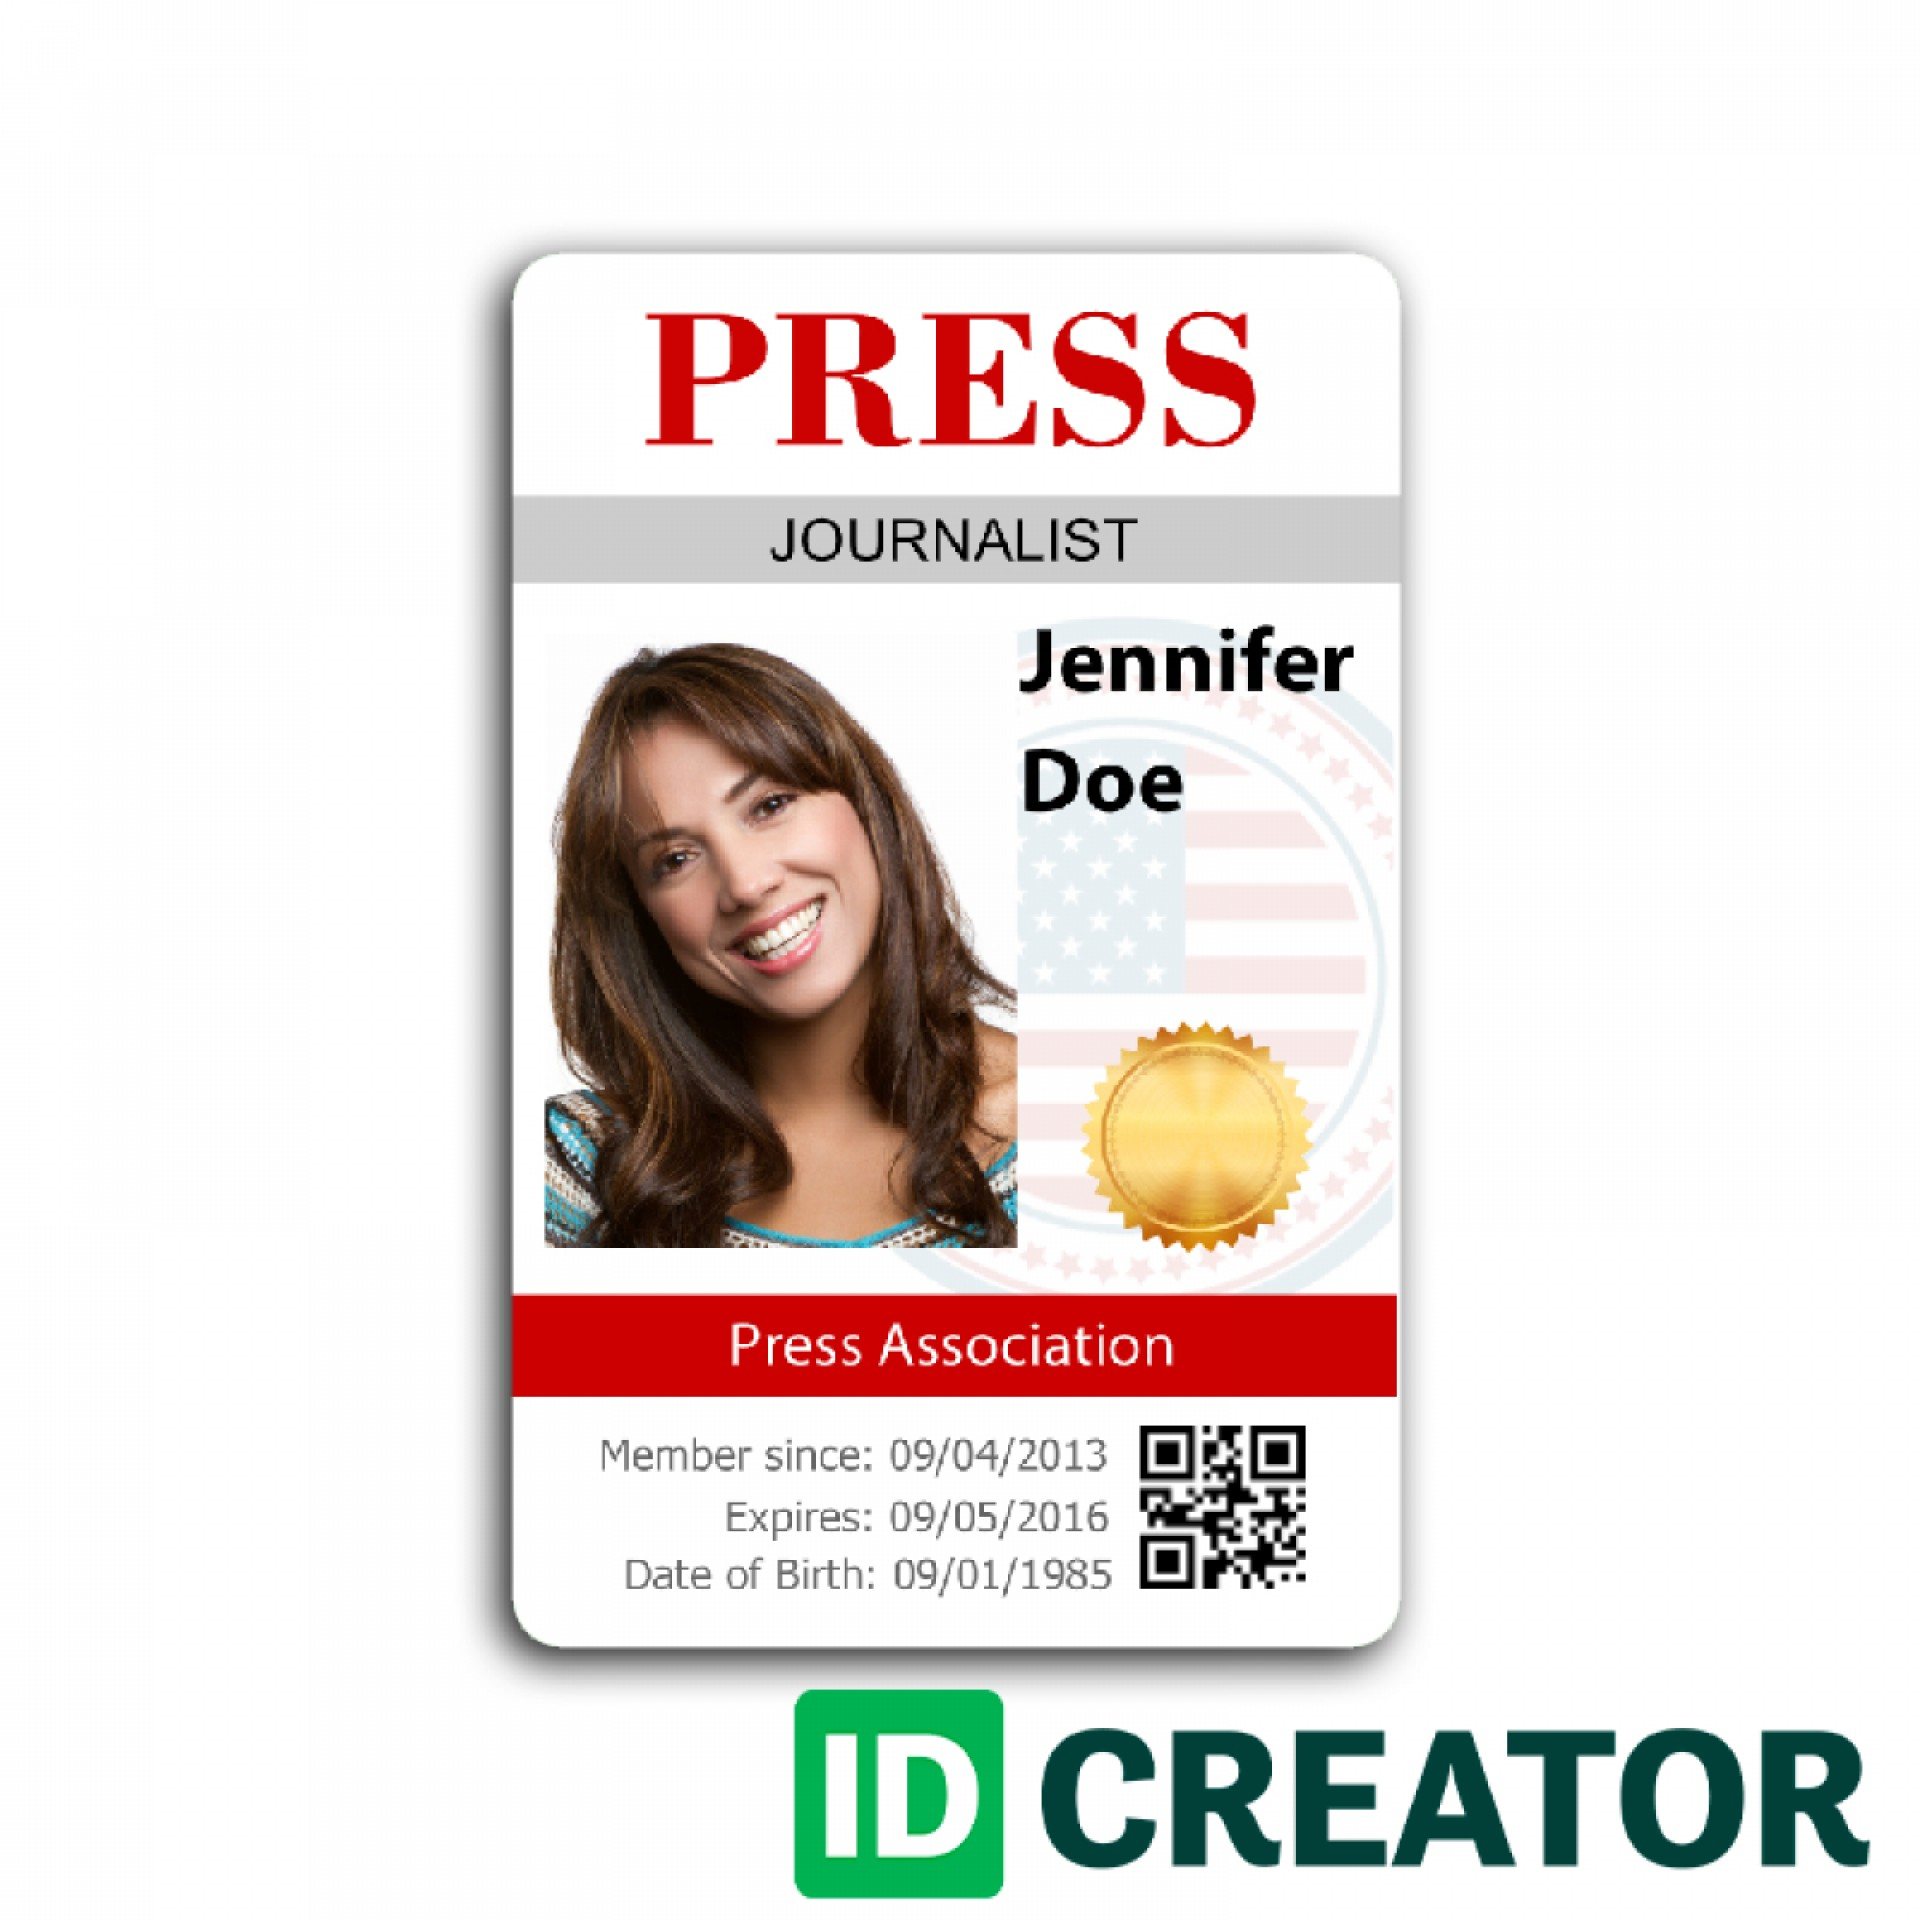 005 Free Id Badge Template Rare Ideas Employee Download With Media Id Card Templates